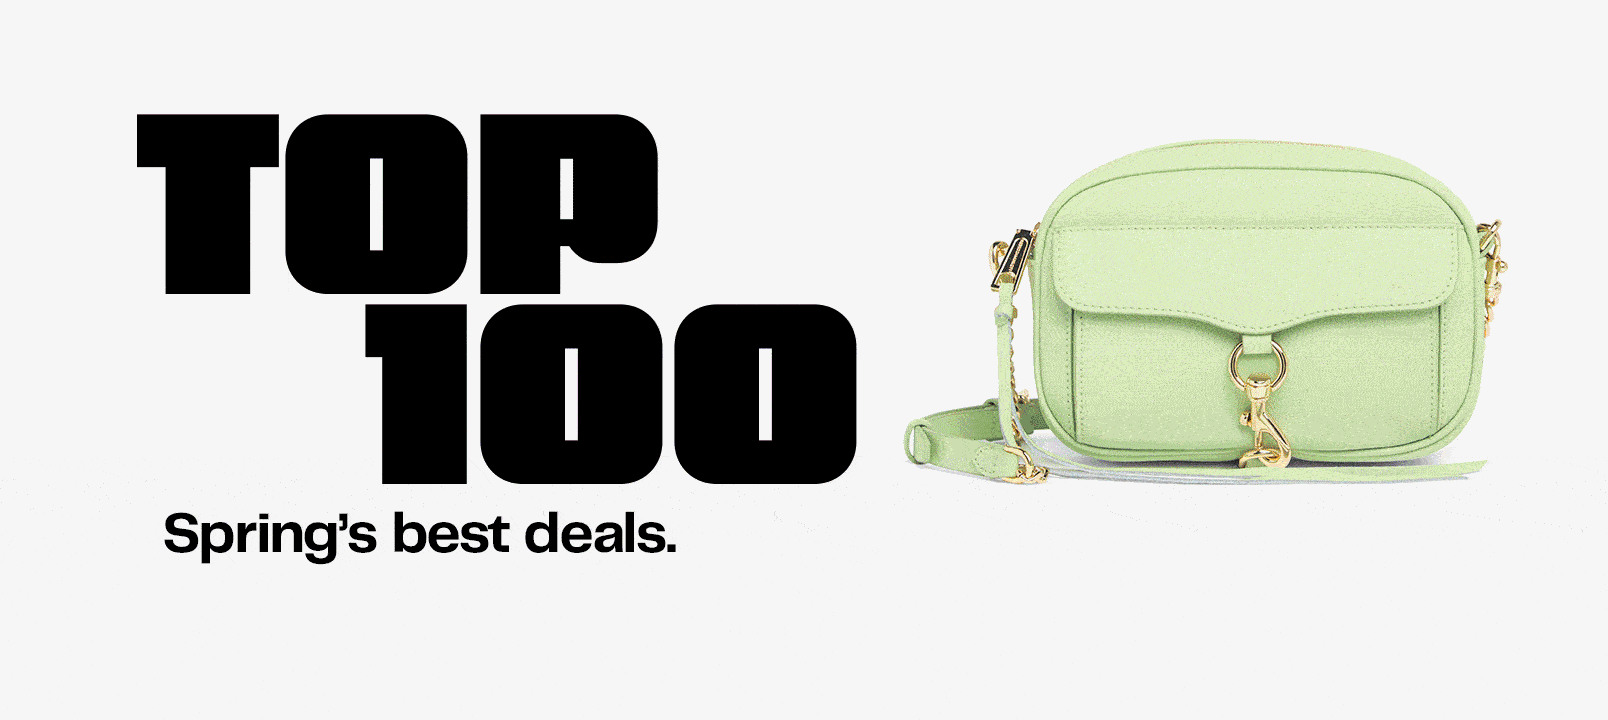 Top one hundred deals.